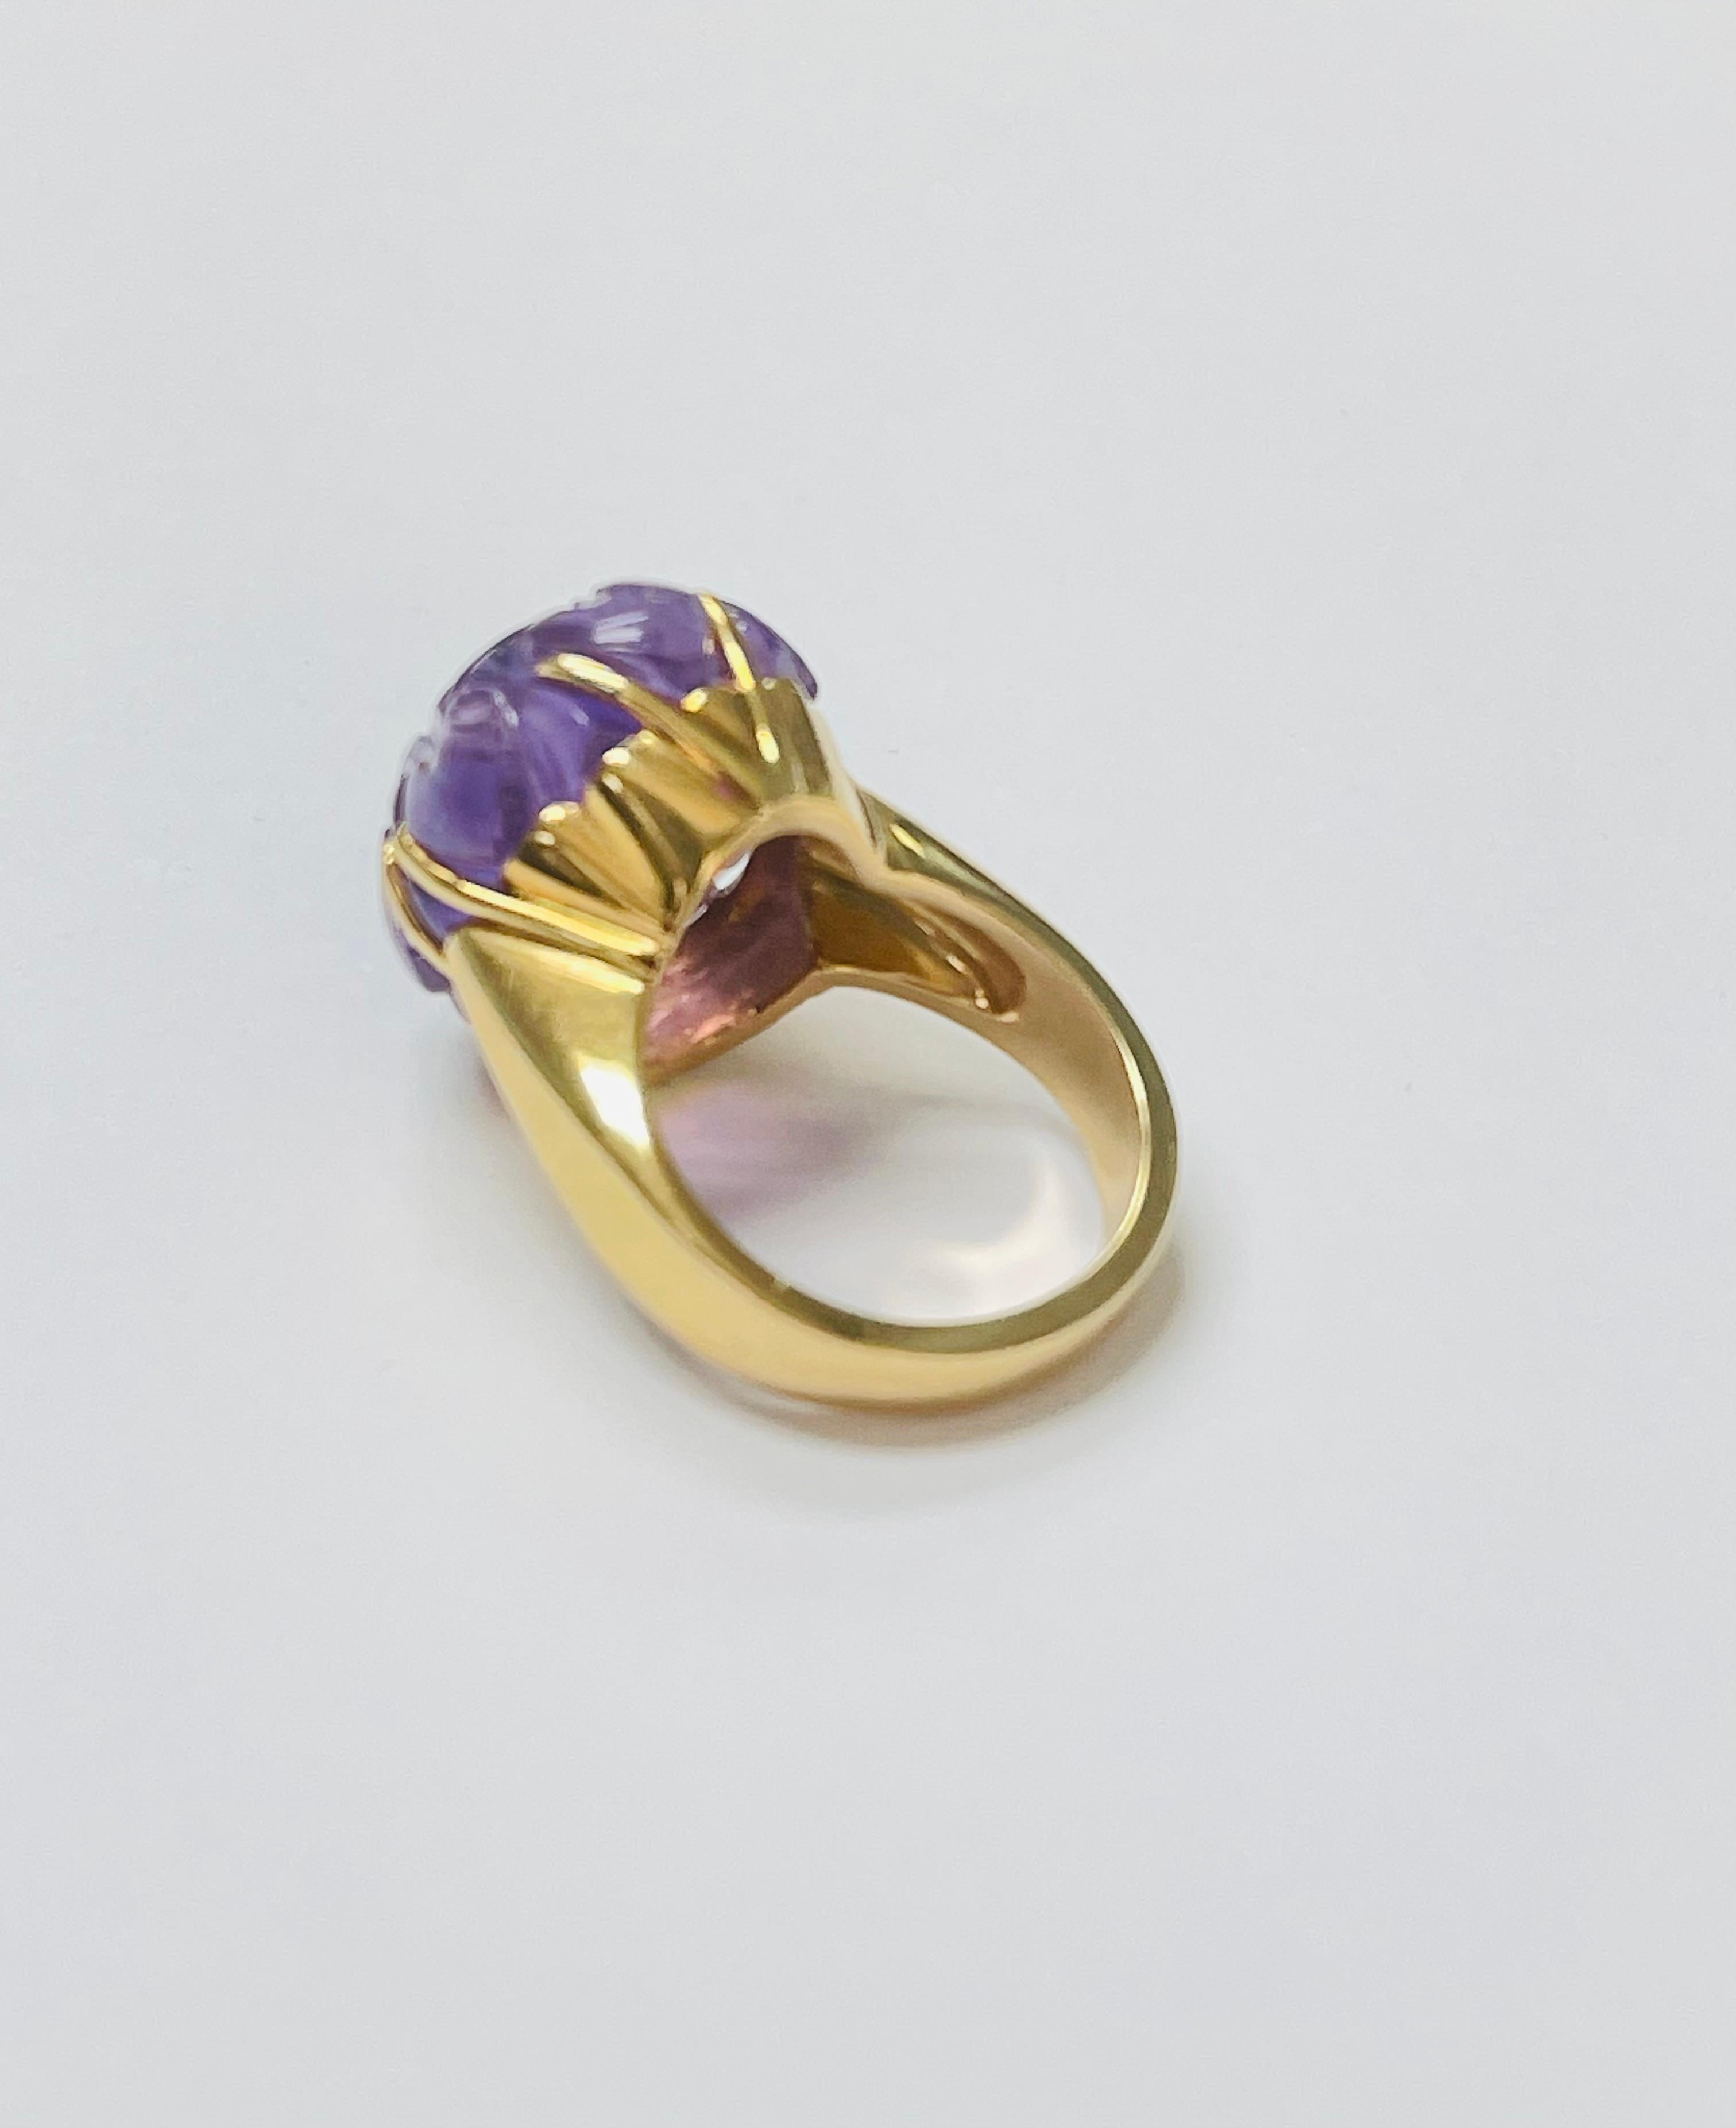 Carved Amethyst Ring in 18k Yellow Gold In Excellent Condition For Sale In New York, NY